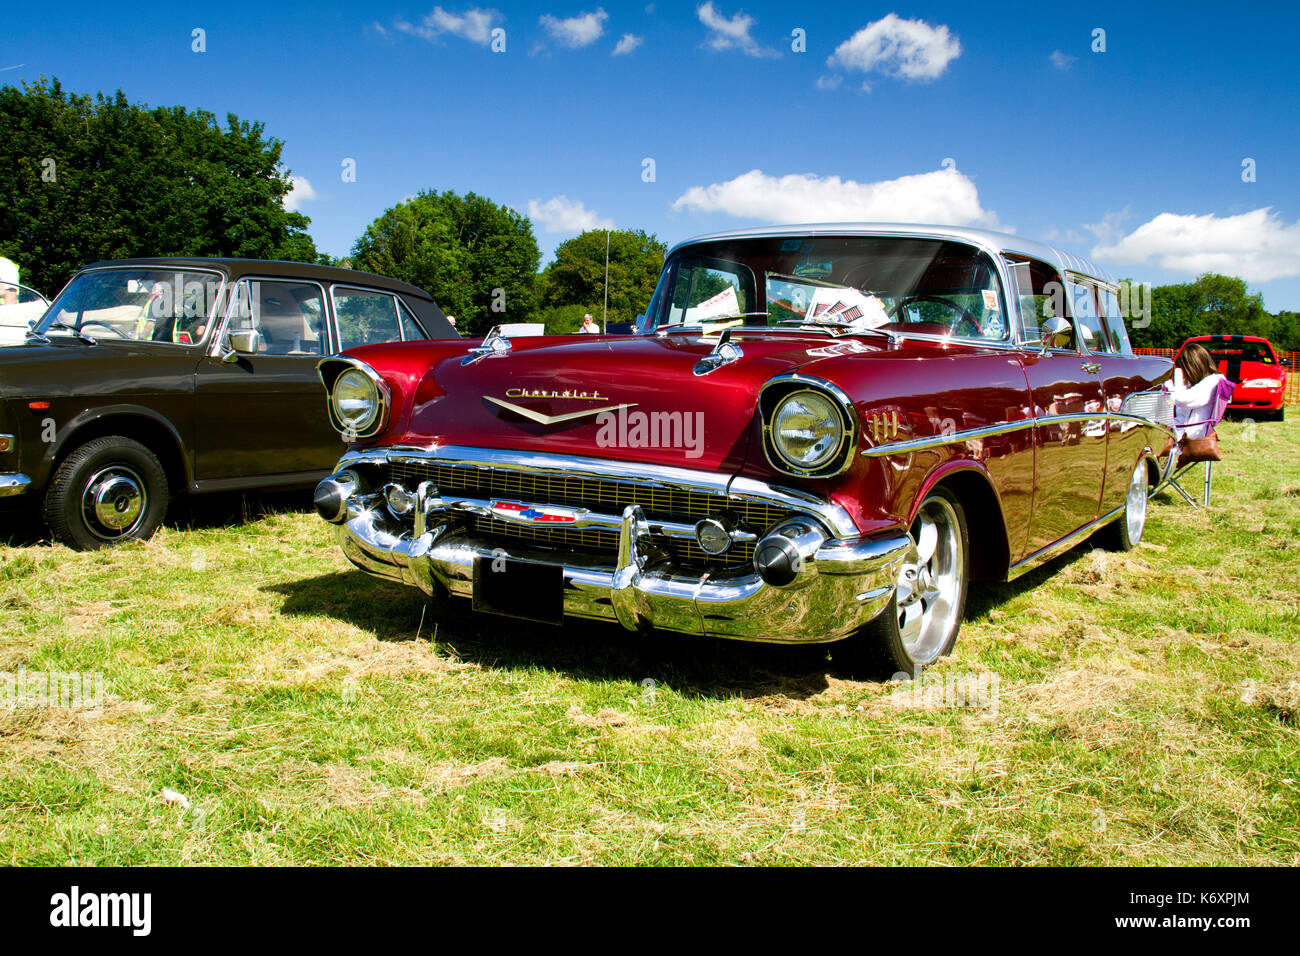 Front view of a maroon Chevrolet Bel Air on display at a classic car show in Wales, UK Stock Photo